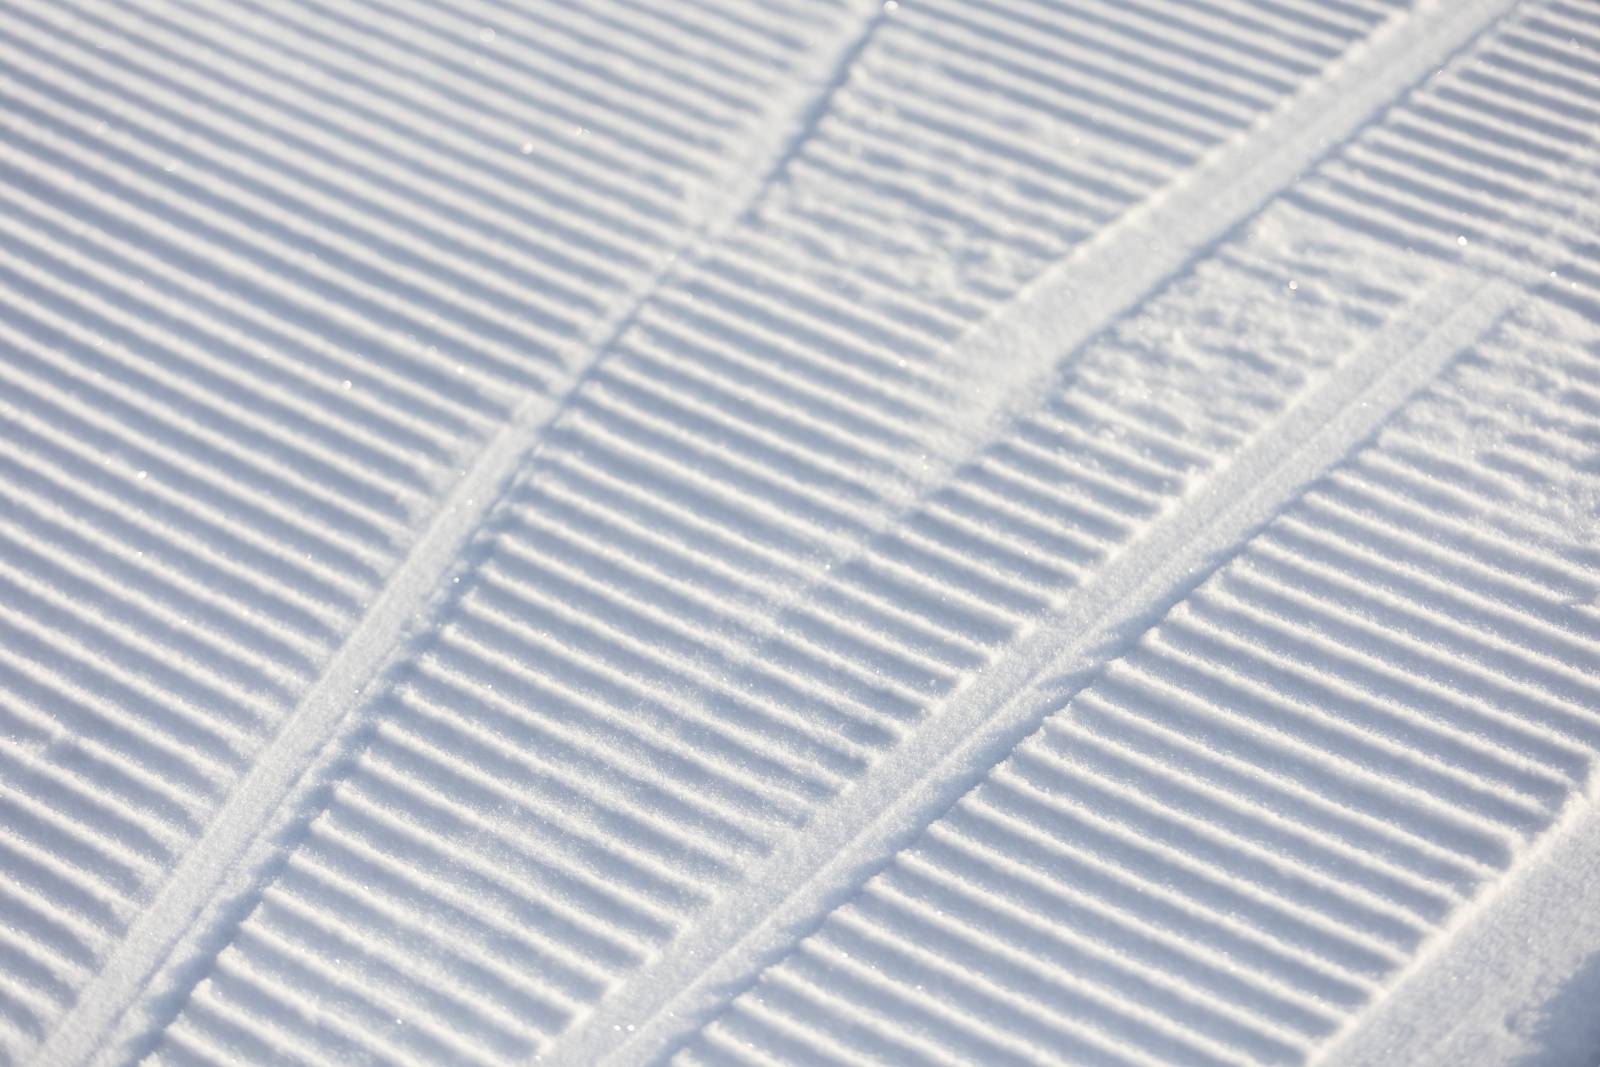 Track lines left behind by skiers going over freshly groomed snow with parallel grooves.